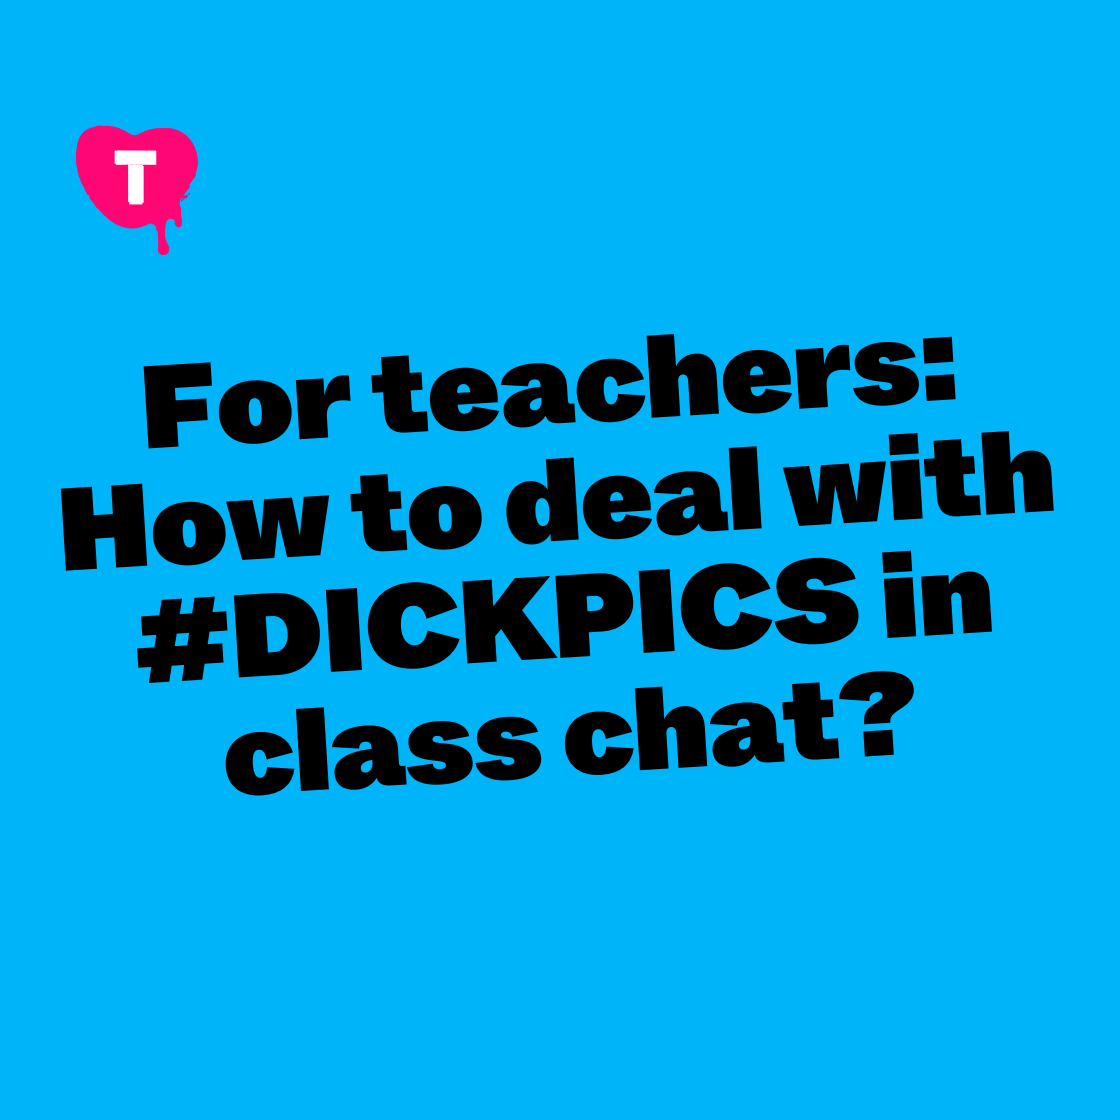 For teachers: How to deal with #DICKPICS in class chat?